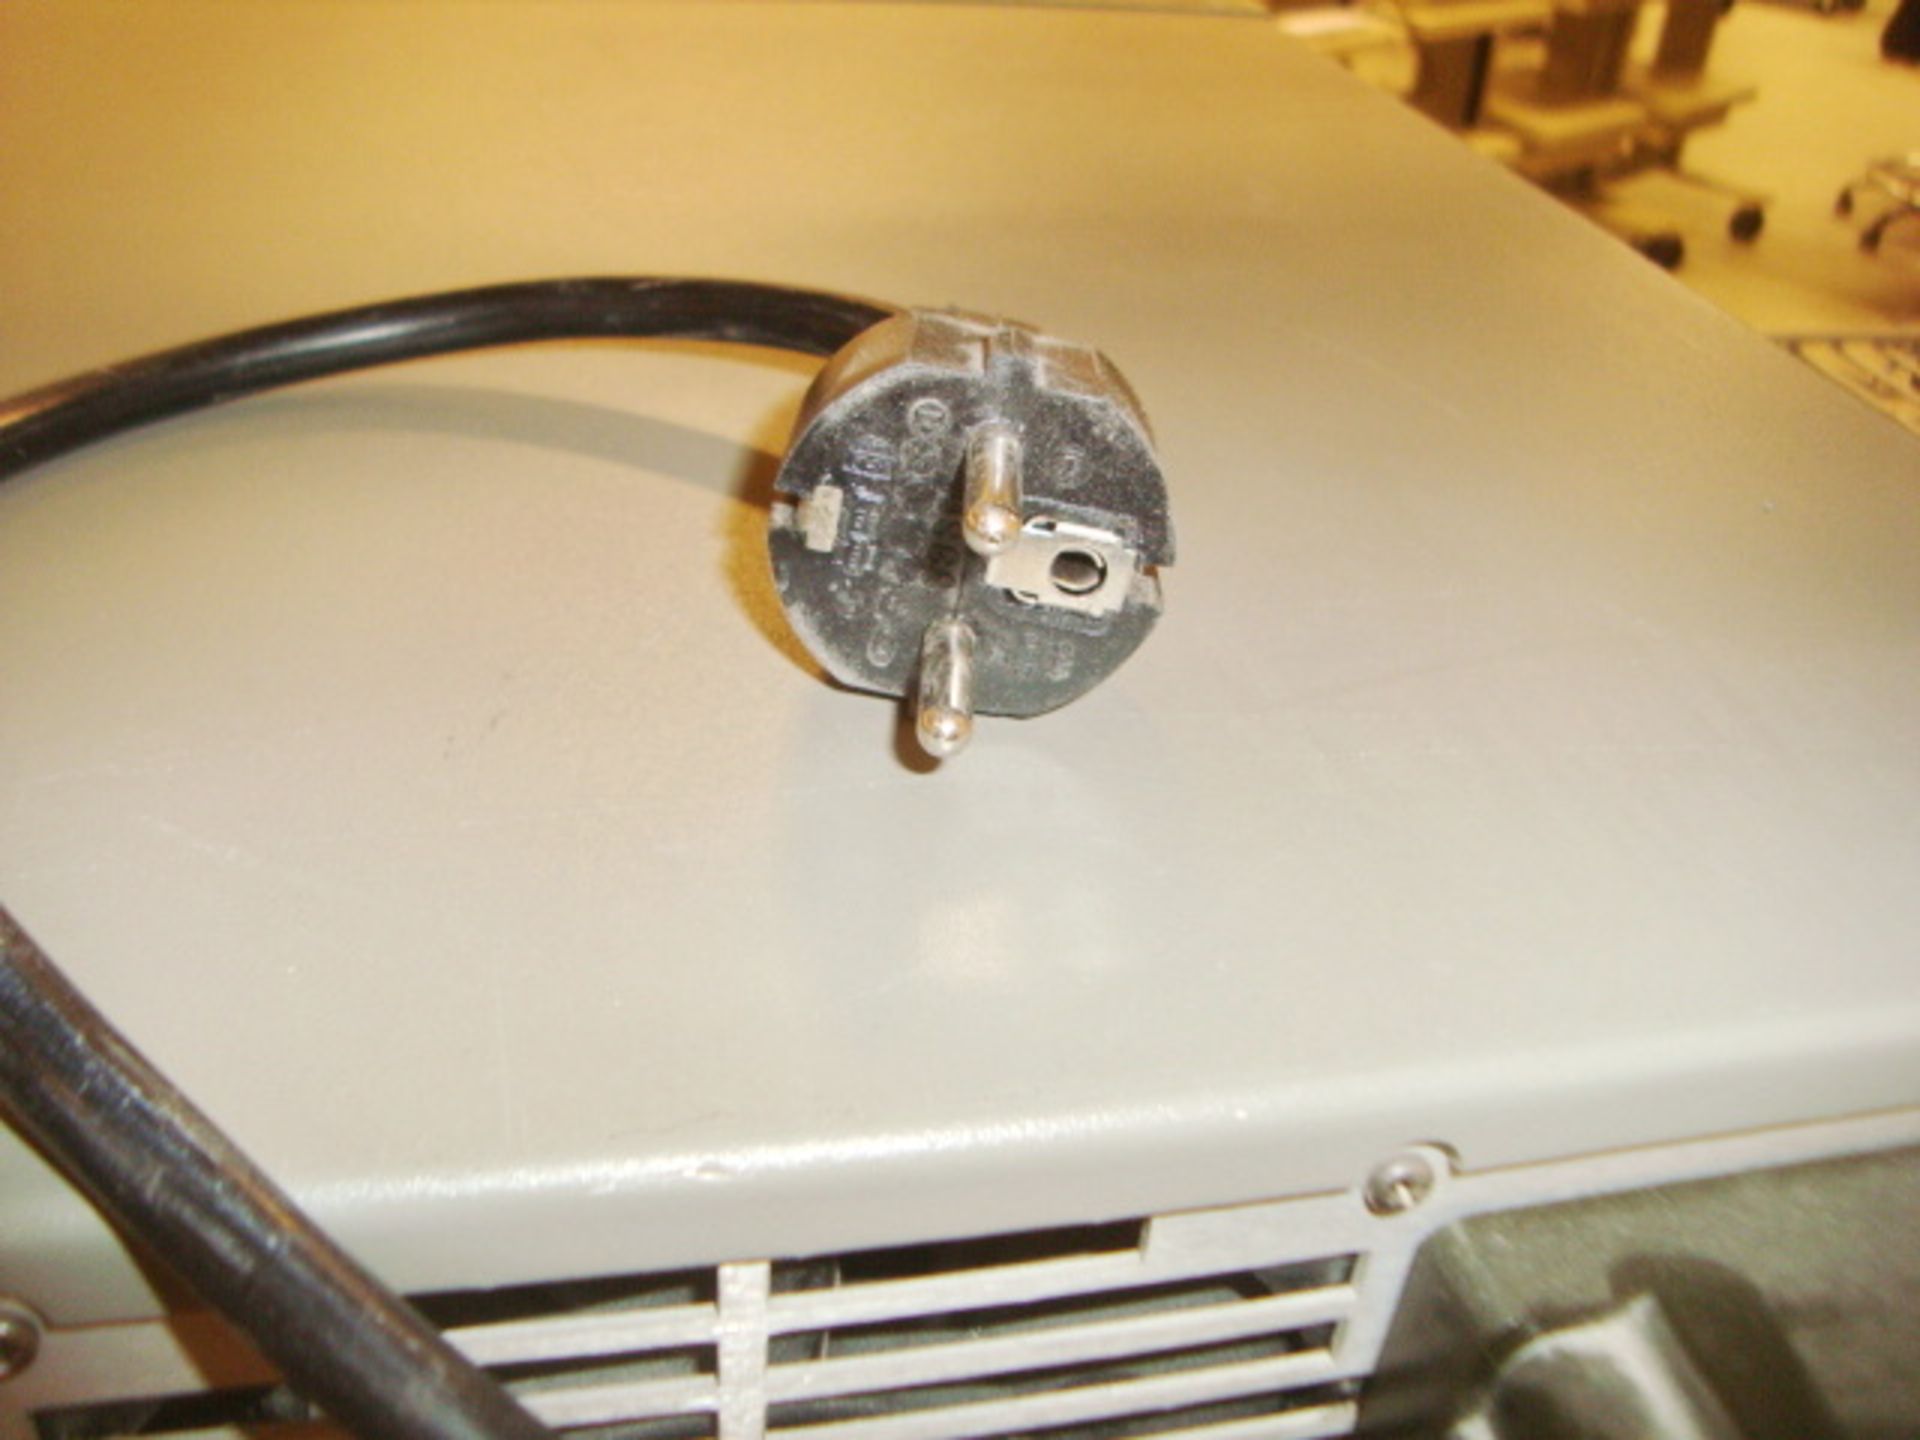 System Power Supplies - Image 3 of 5